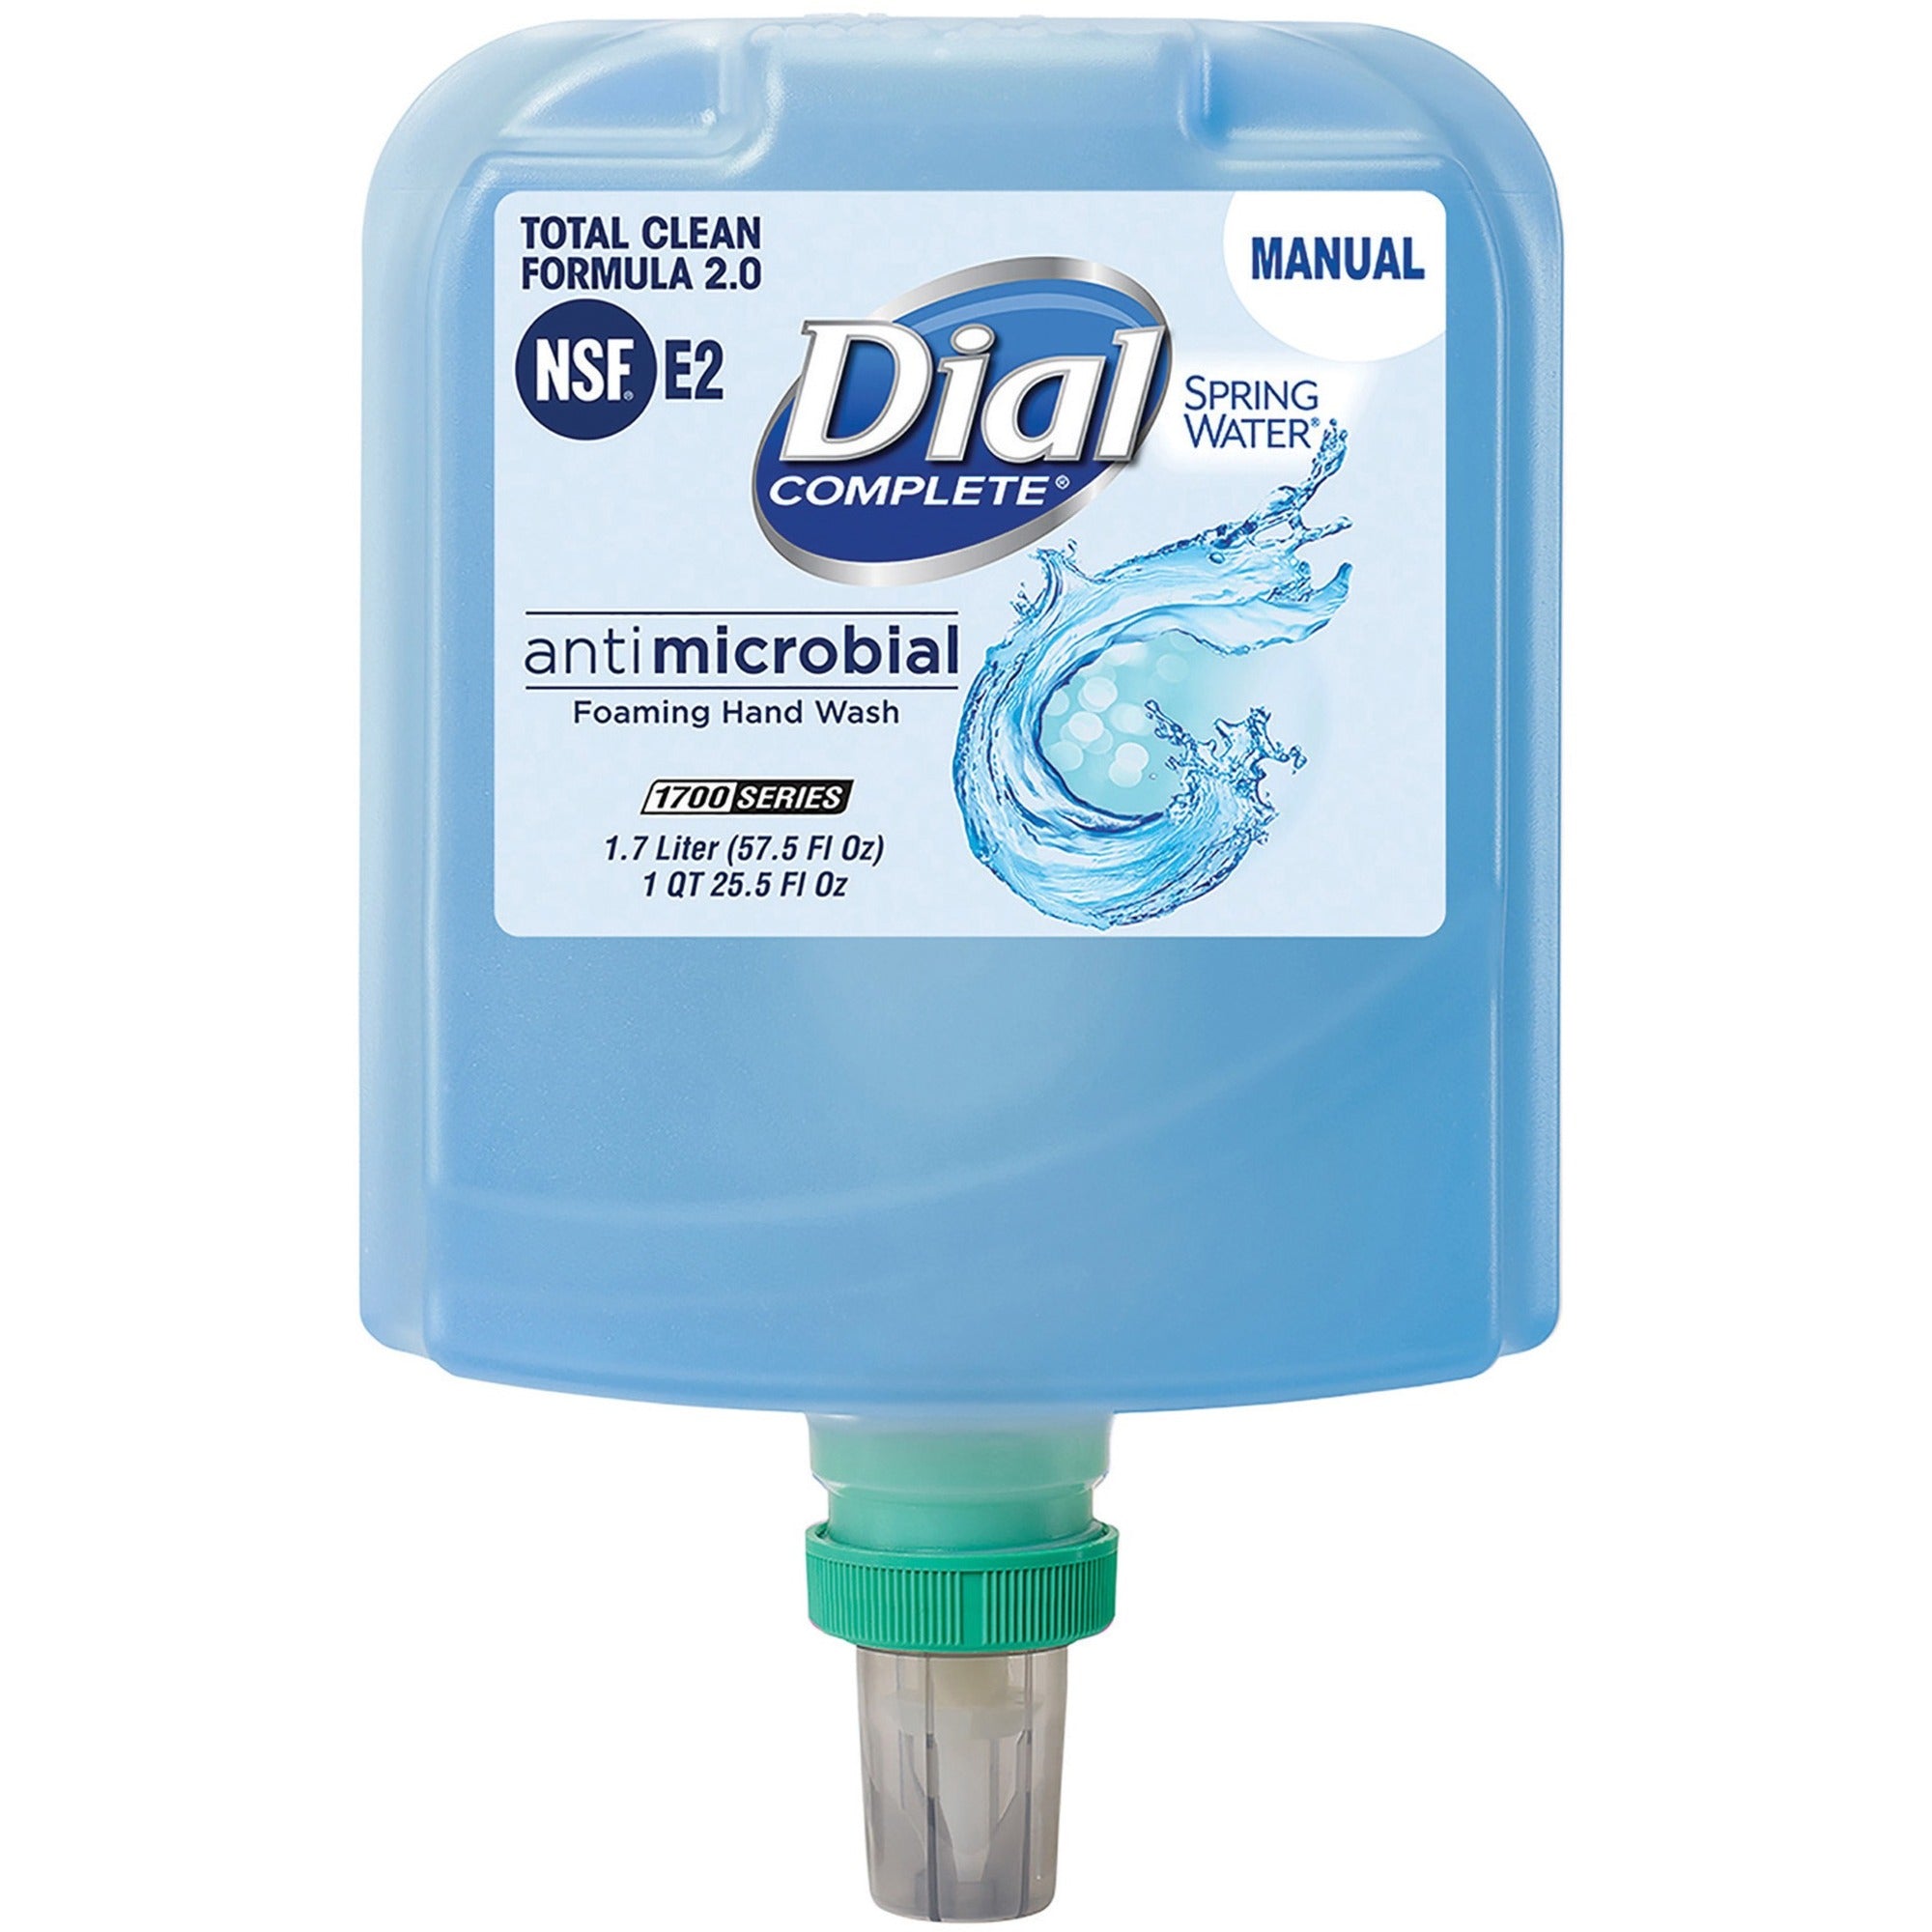 dial-complete-complete-antibacterial-foaming-hand-wash-refill-spring-water-scentfor-575-fl-oz-17005-ml-bacteria-remover-home-healthcare-school-office-restaurant-daycare-moisturizing-antibacterial-blue-non-drying-1-each_dia19690 - 1